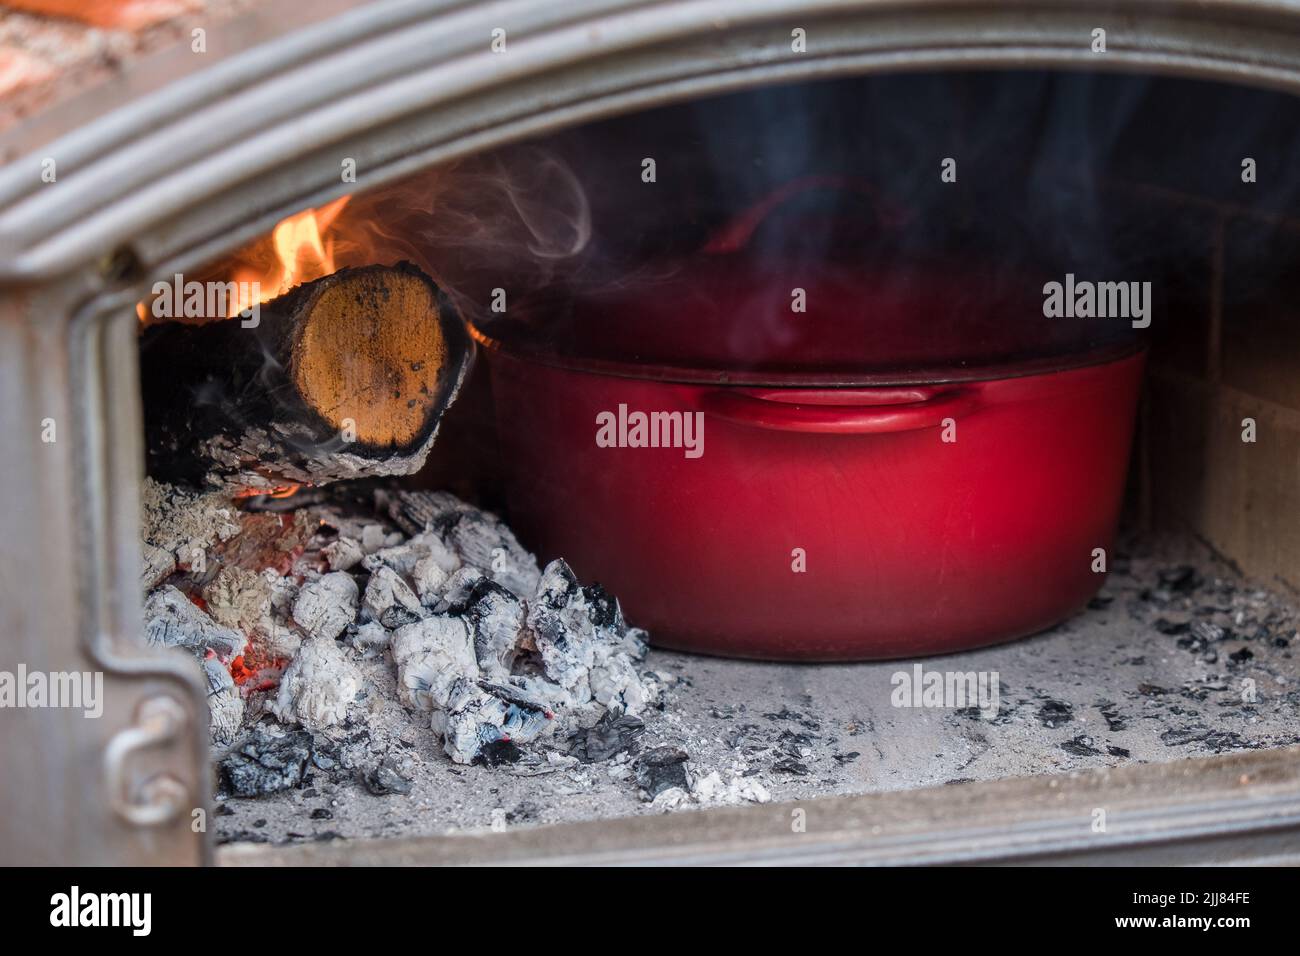 Cooking in stone oven. Cast iron pot in wood-fired oven. Stock Photo